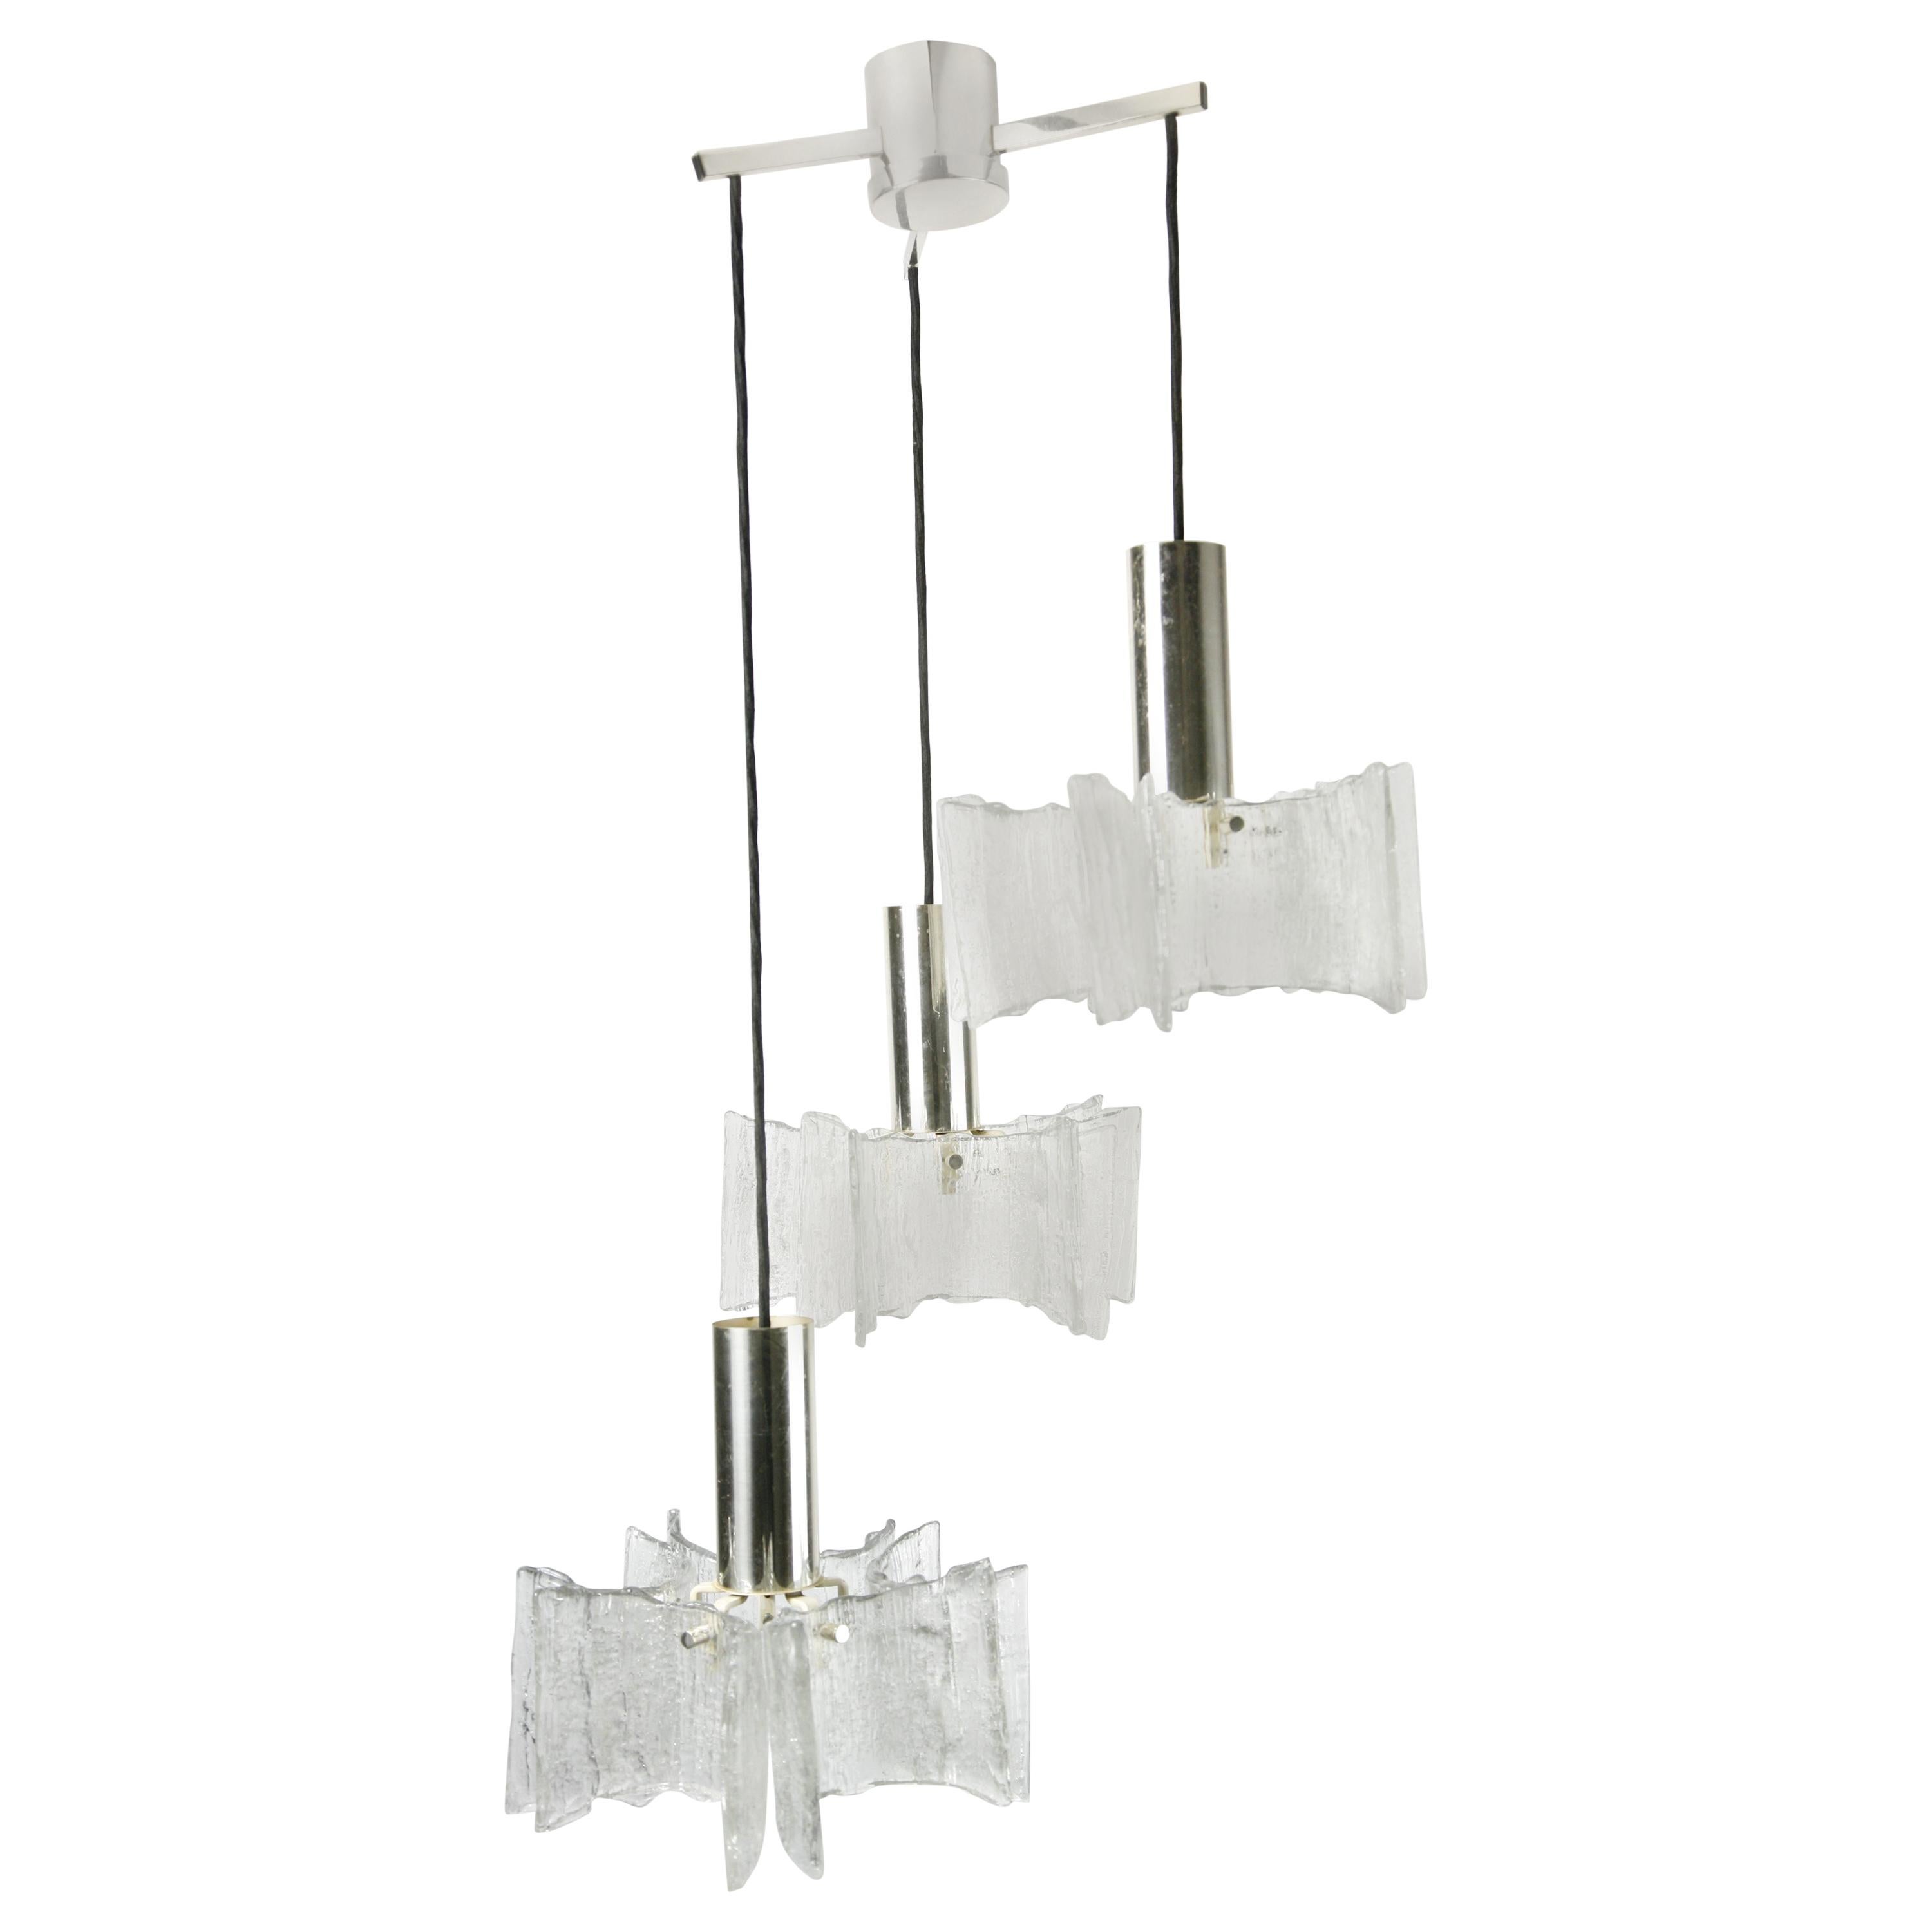 Five individual curved glass elements hold in place with a chrome finial, the glass has texture and is frosted, this cascade is 3 individual lights hanging from a chrome ceiling fitting. 

Each light element is 10